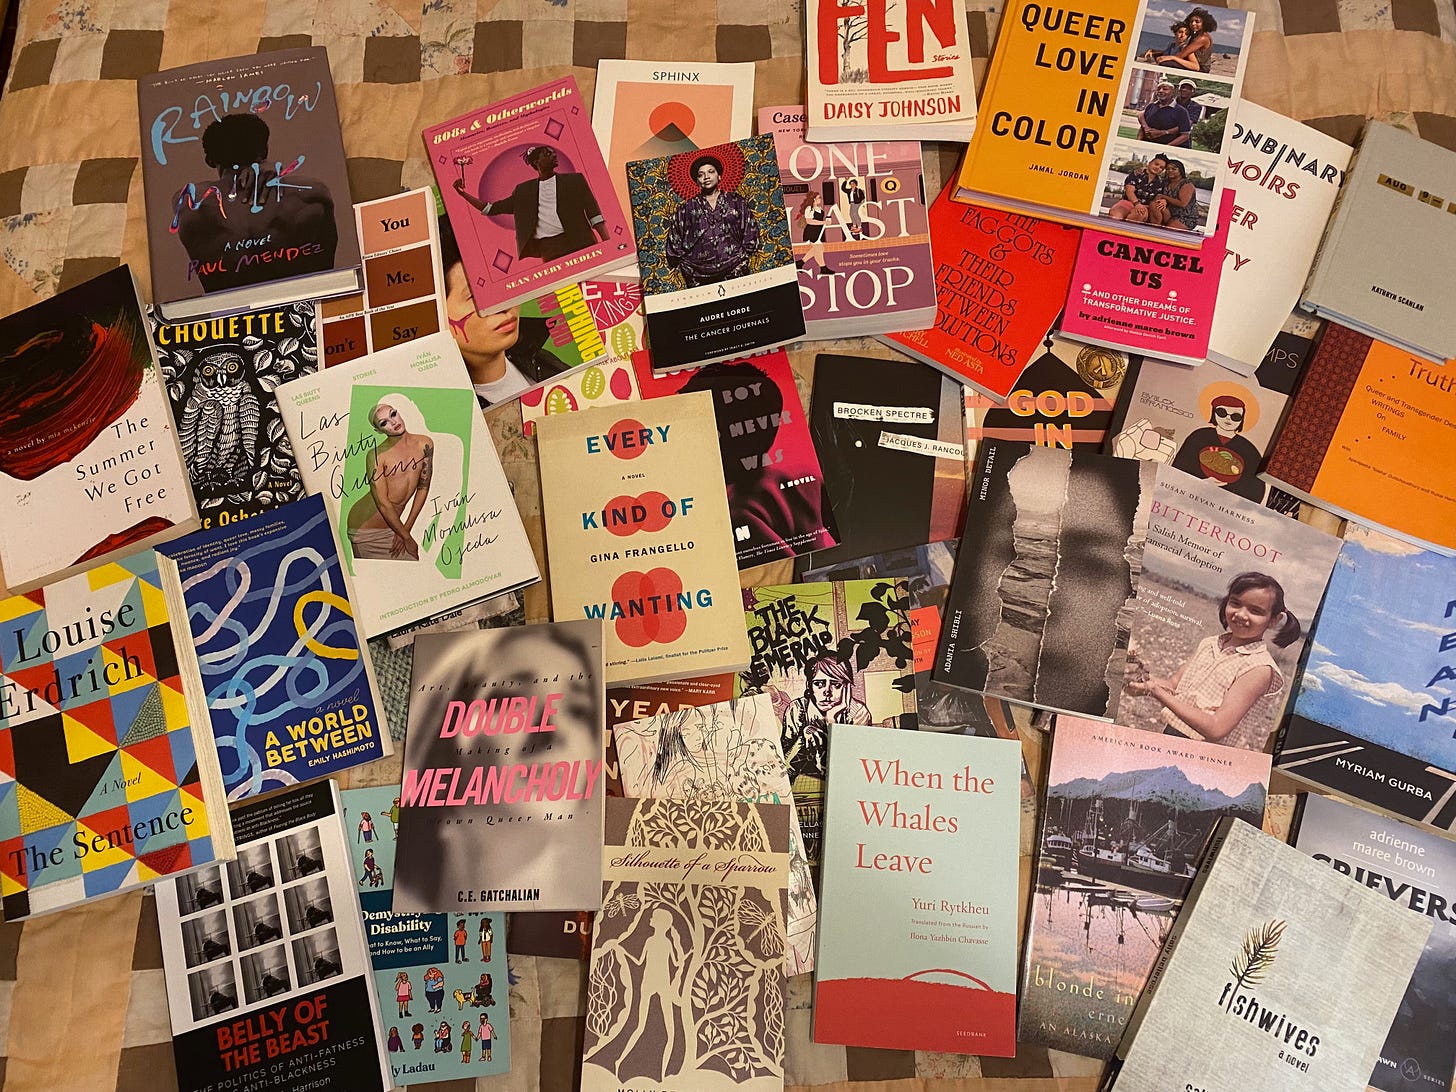 A huge pile of books scattered across a brown and pink quilt. A few of titles: Rainbow Milk, One Last Stop, Queer Love inColor, Double Melancholy, The Sentence, When the Whales Leave, and The Summer We Got Free.